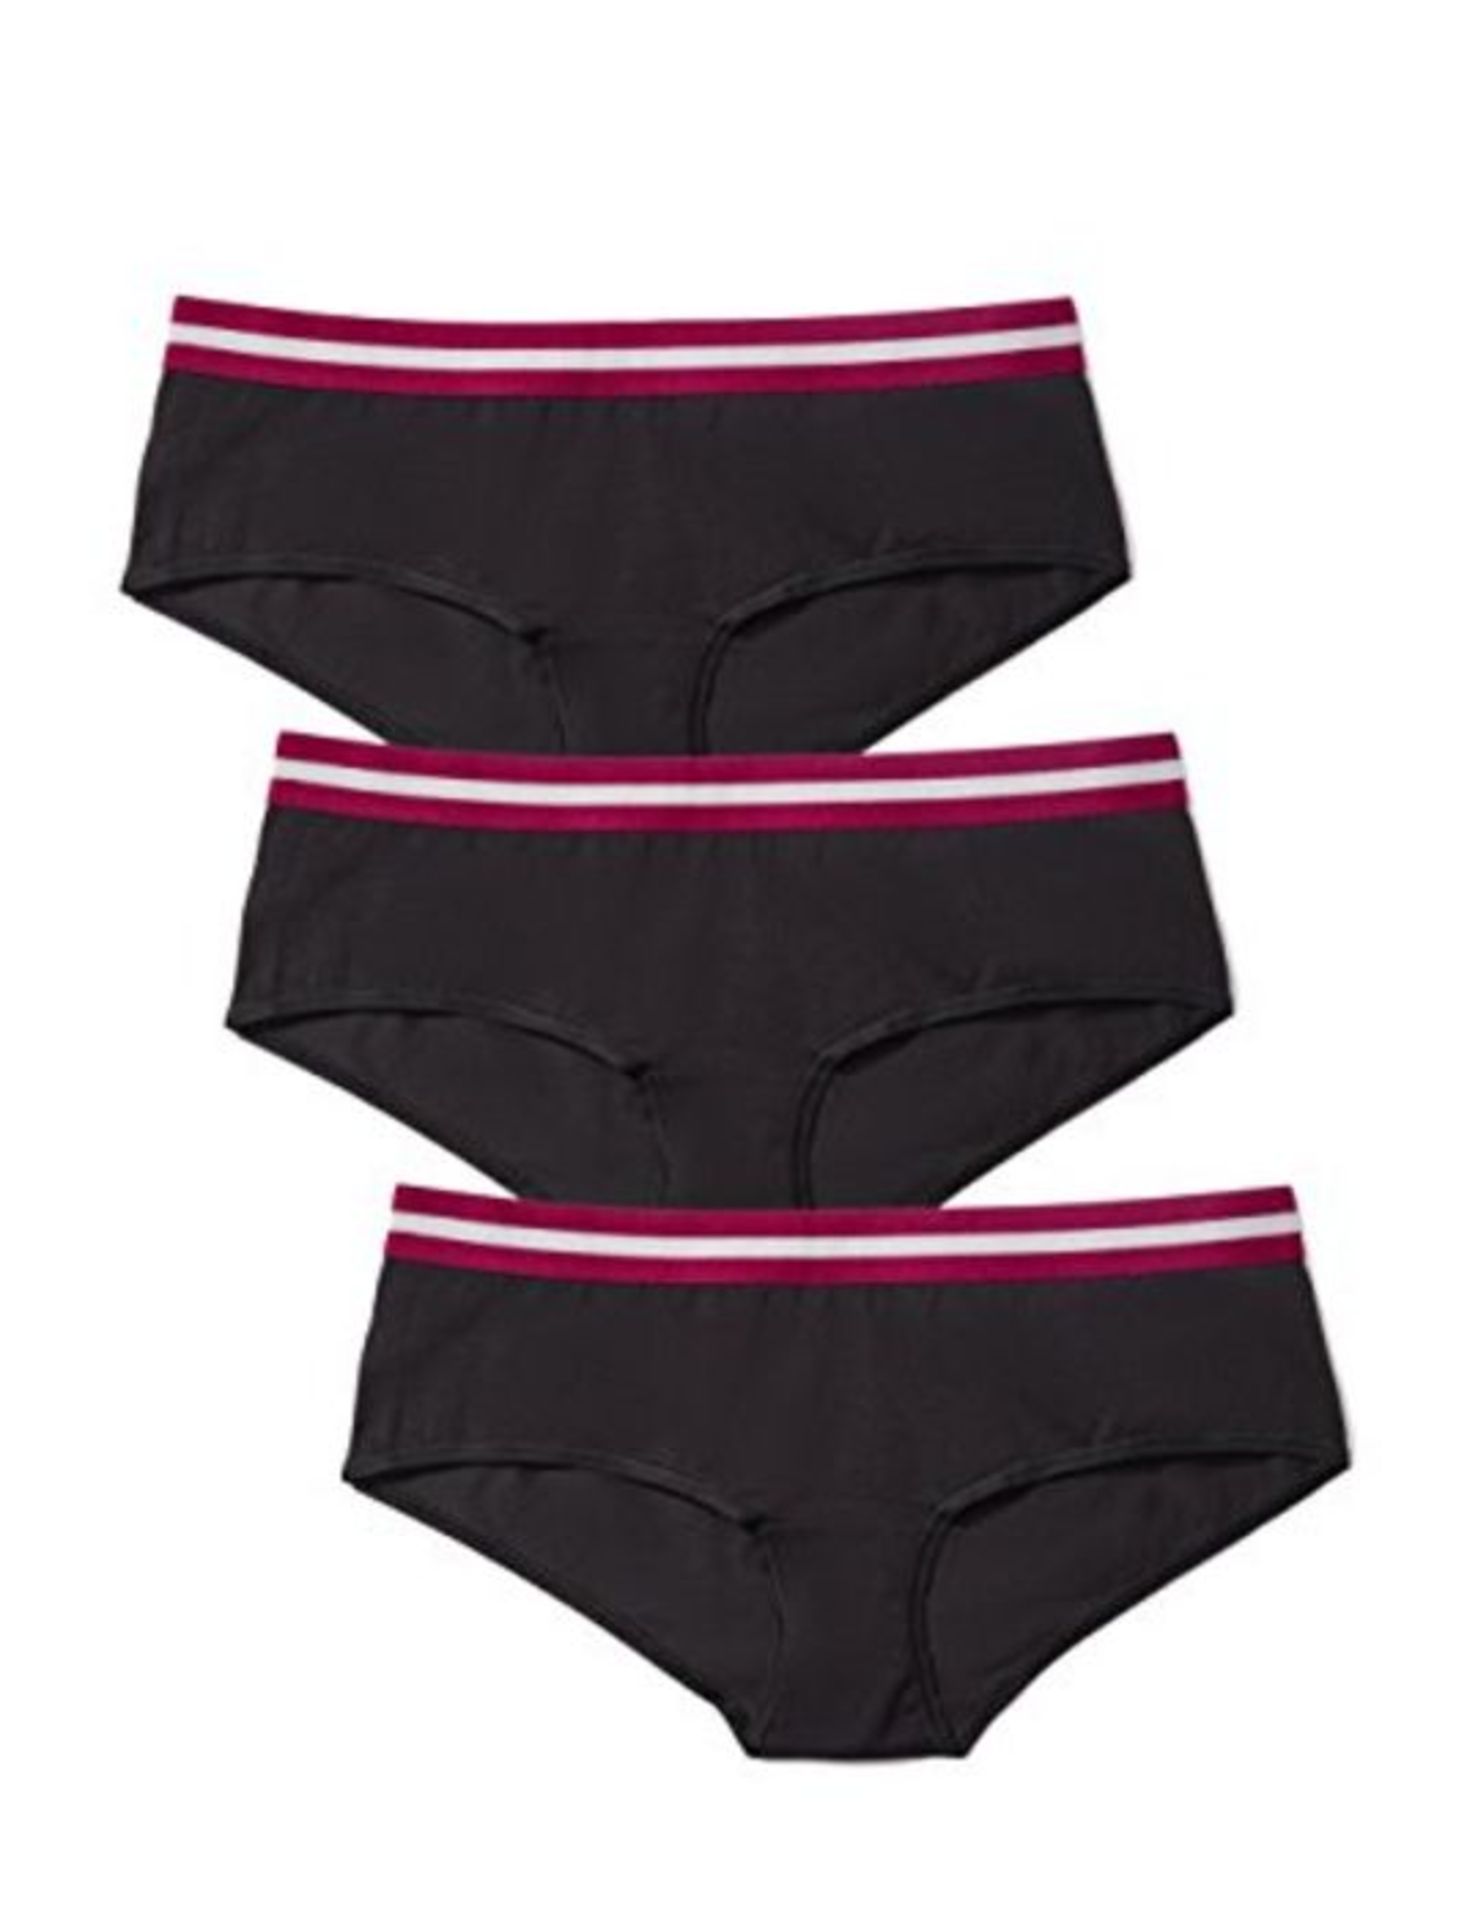 COMBINED RRP £103.00 LOT TO CONTAIN 4 ASSORTED Apparel: Iris, Sans, Playtex, Banana, - Image 2 of 5